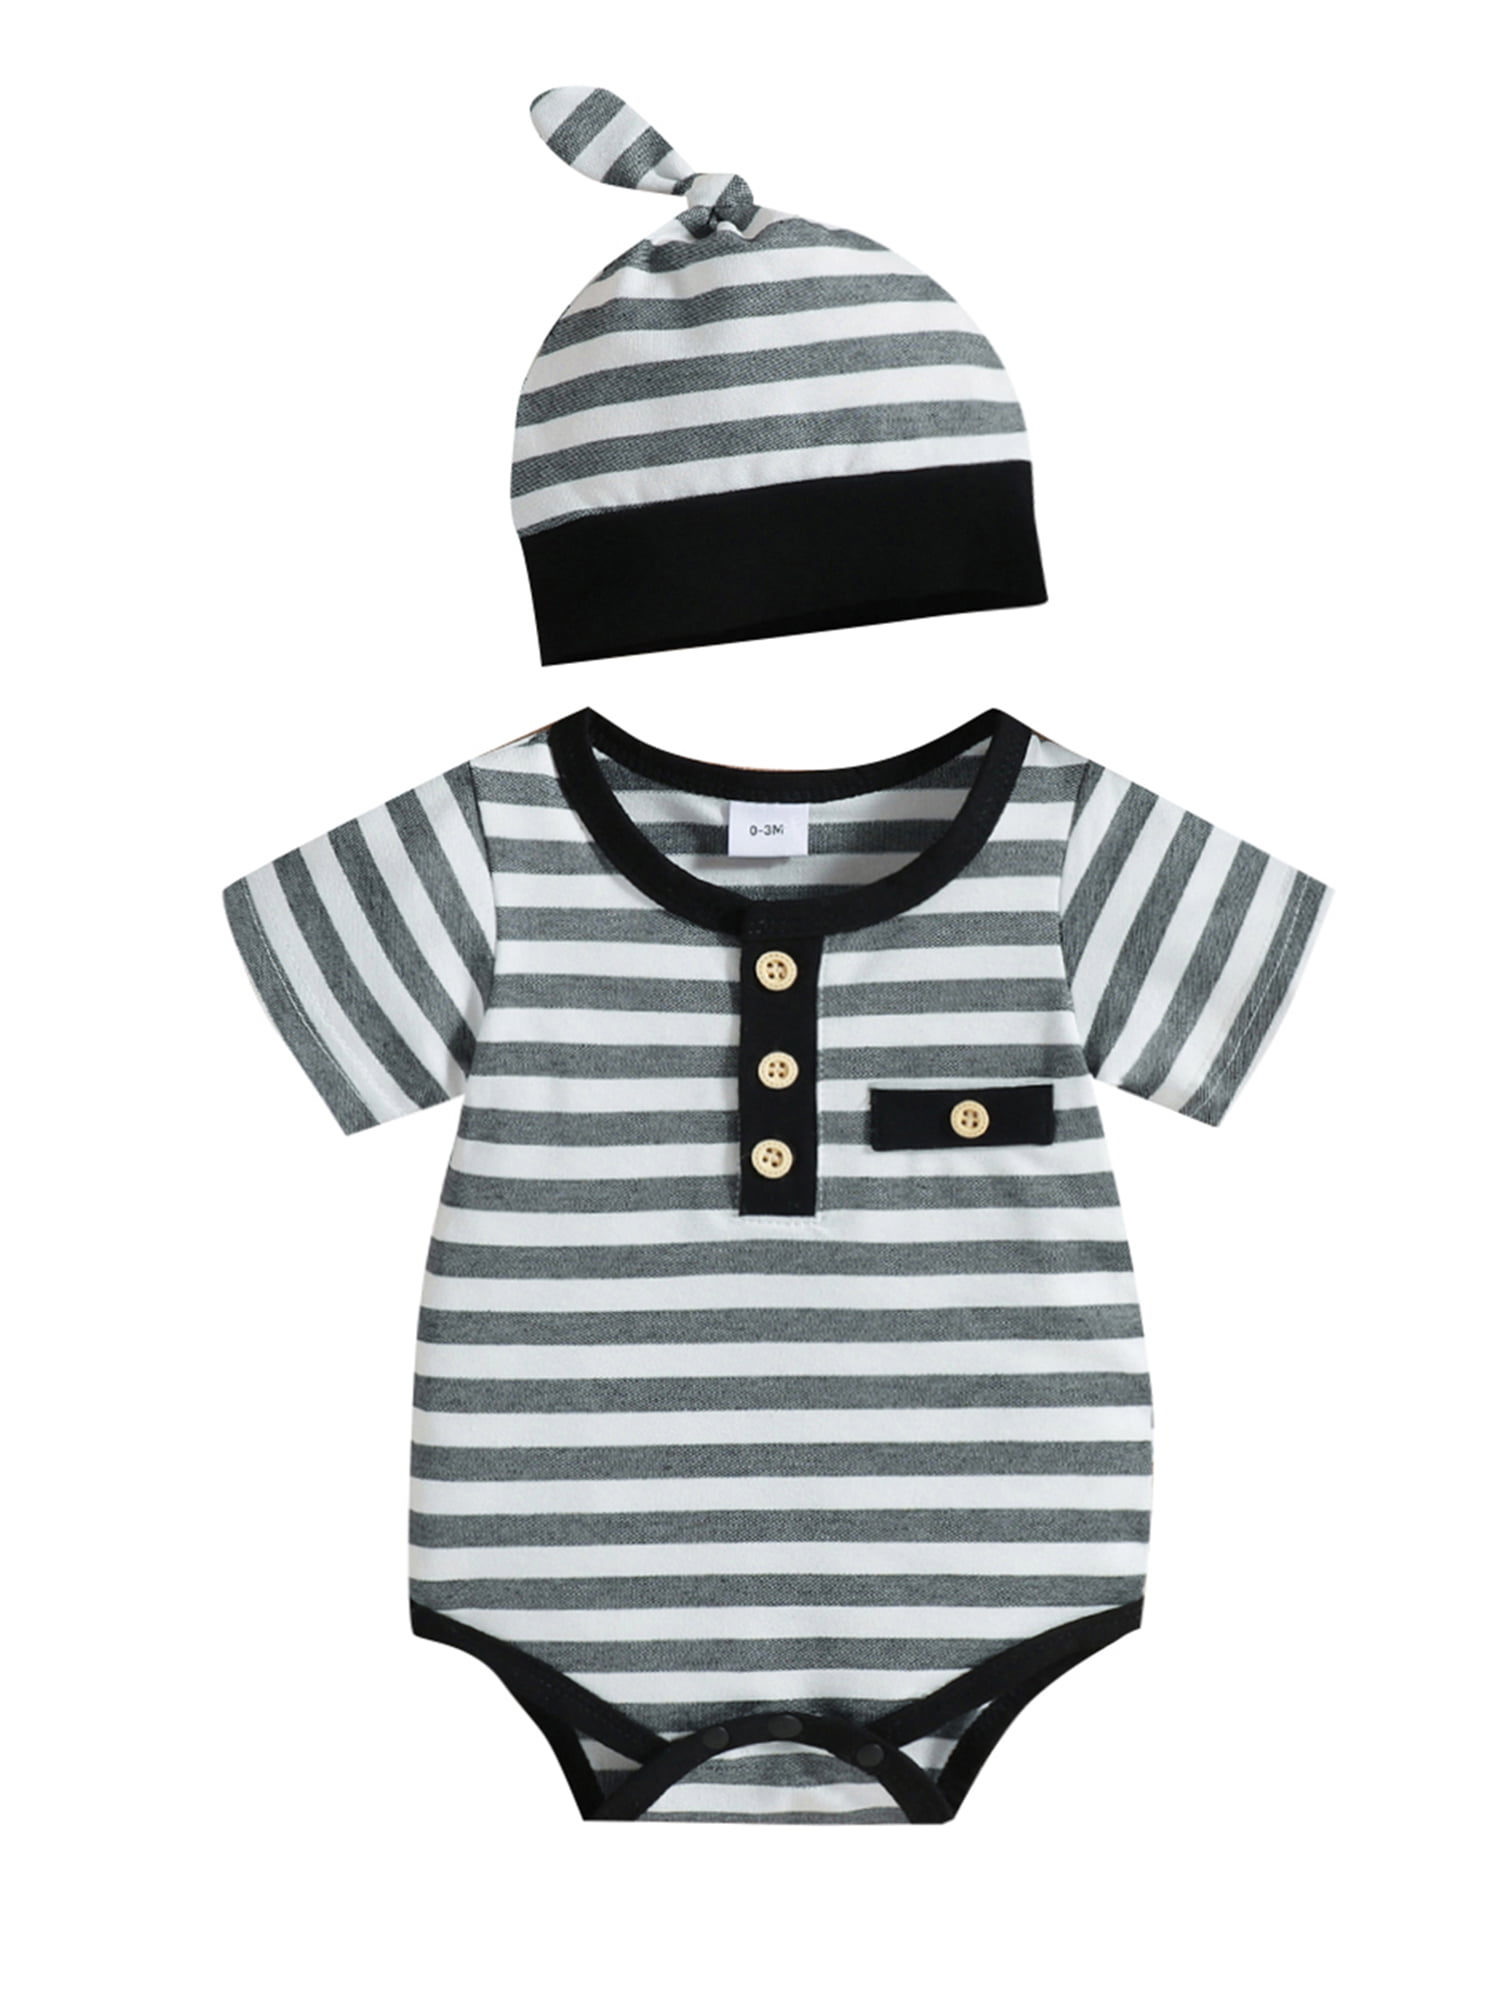 Mialoley Unisex Baby Boys Romper hi Strips Pants+Hat Outfit Summer Clothes Set Im New HERE Tops Bodysuit